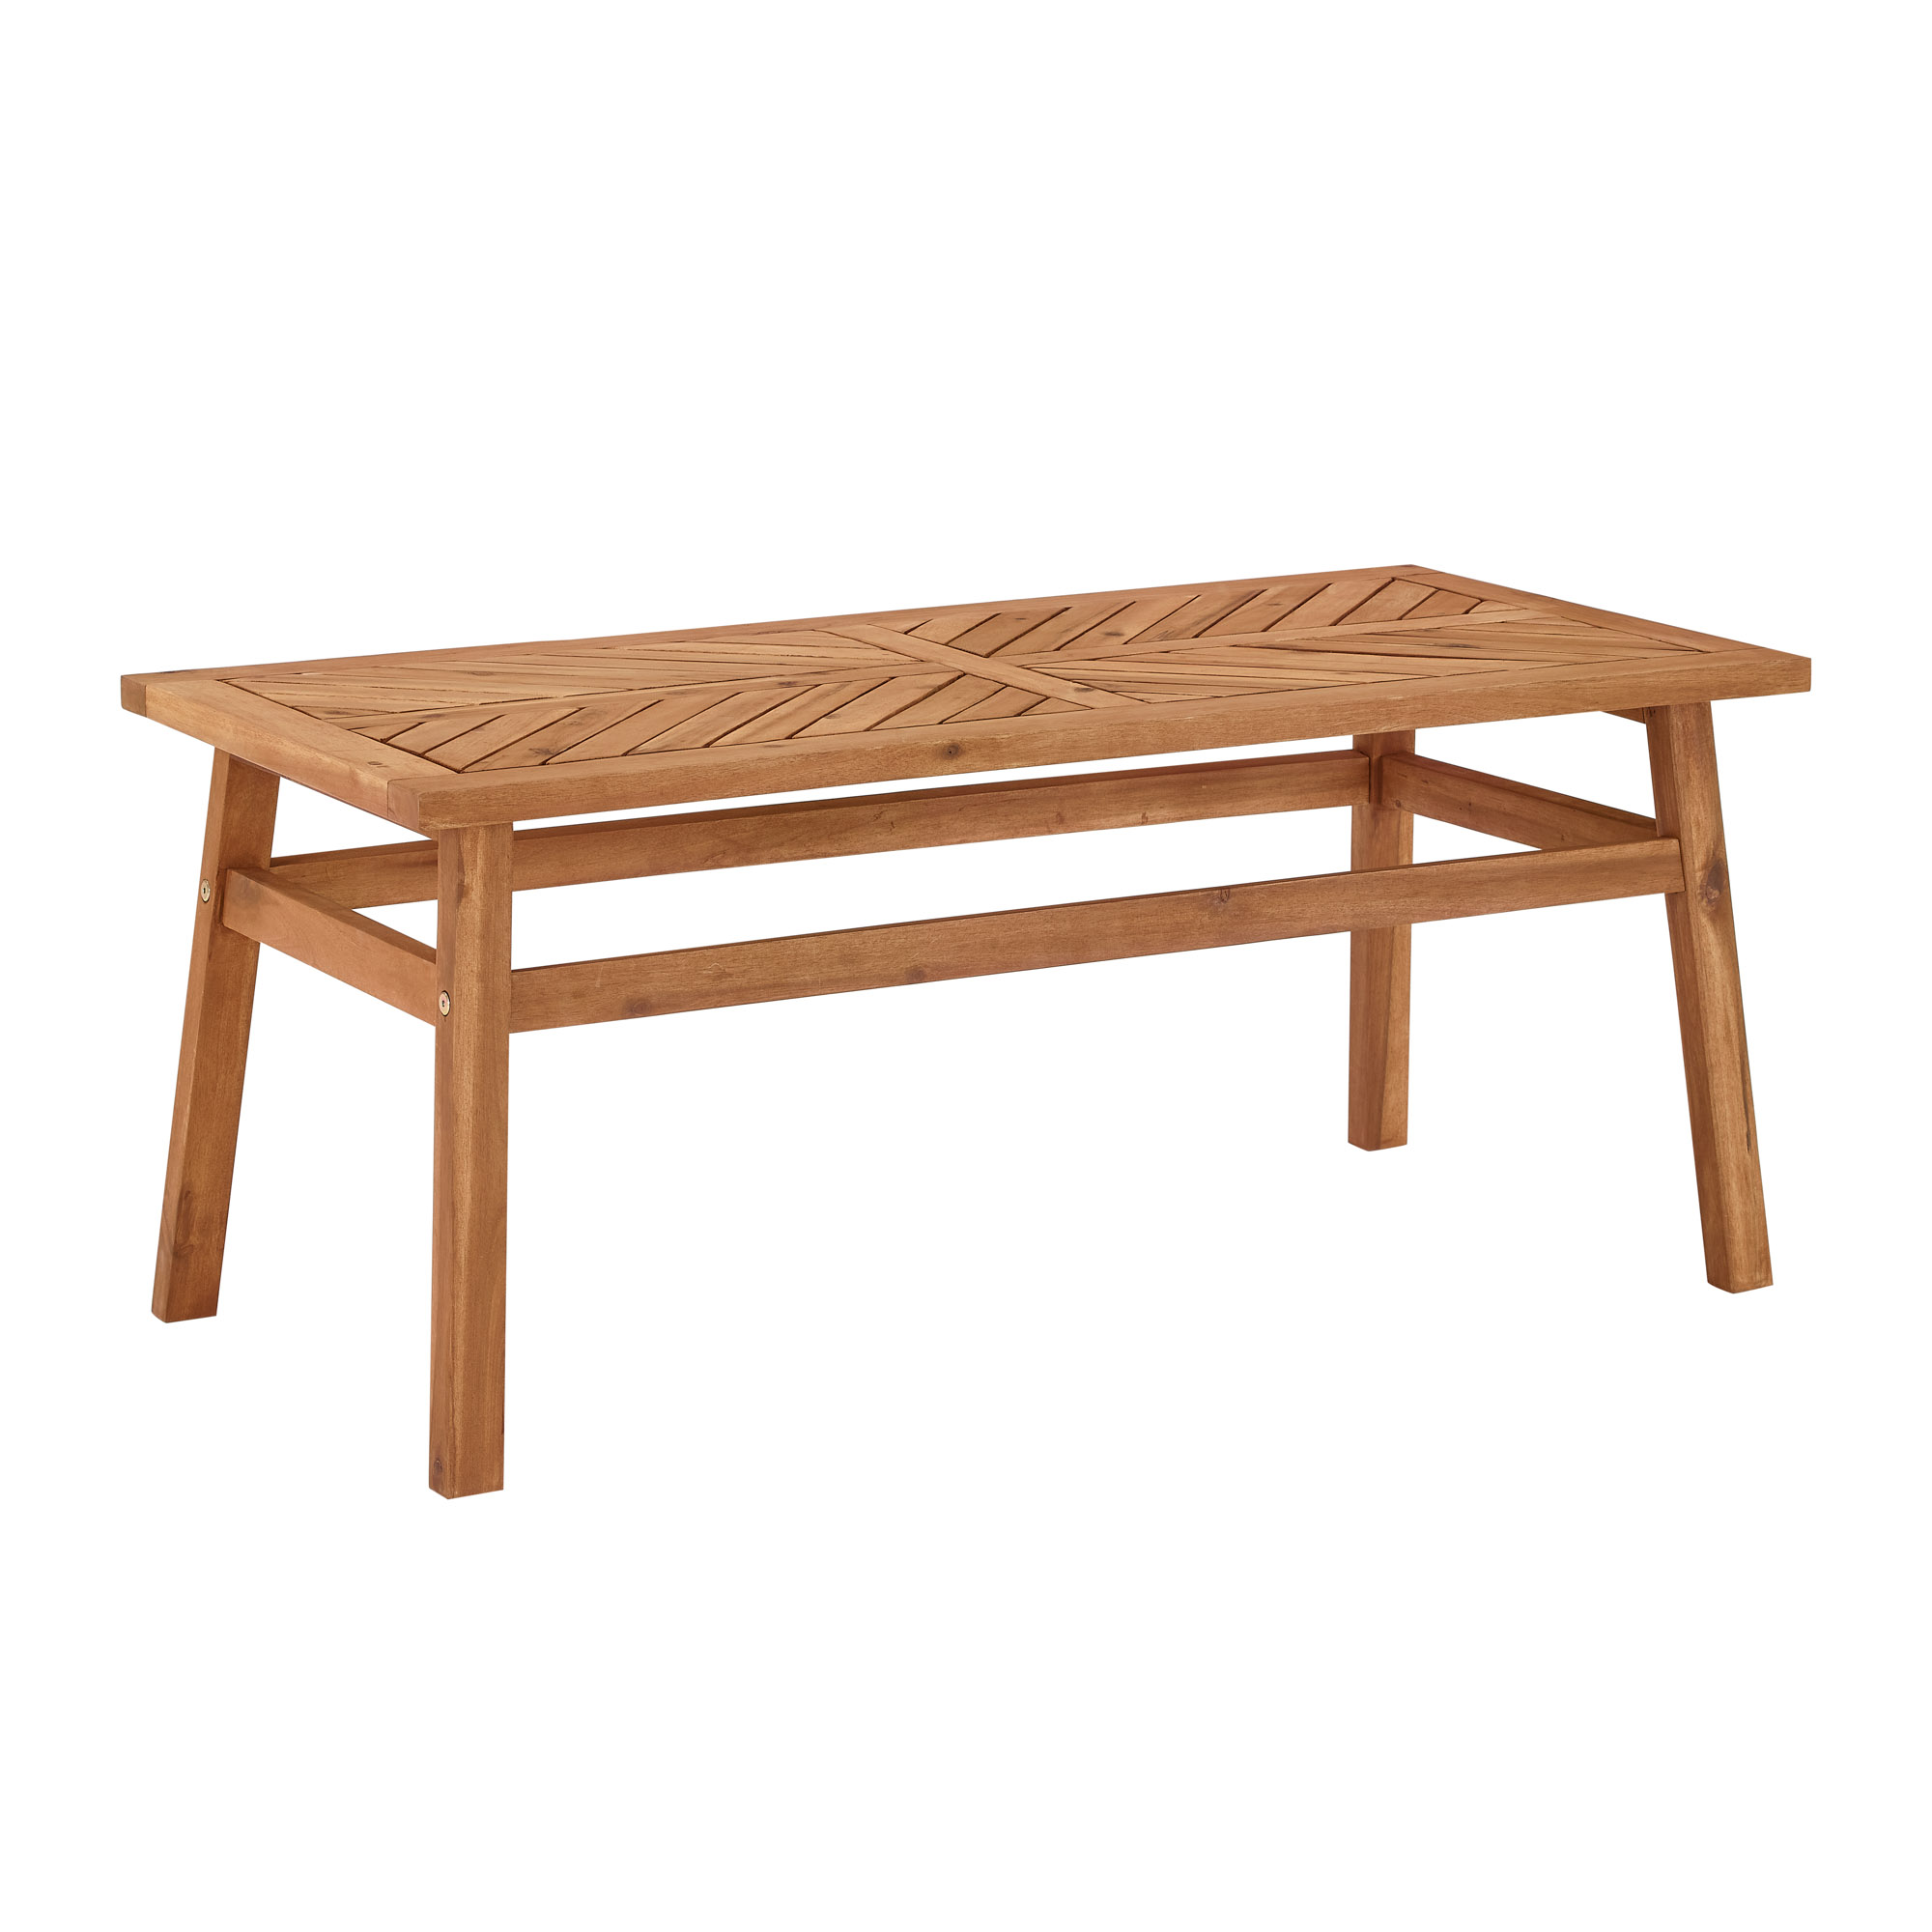 Walker Edison Wood Outdoor Coffee Table with Chevron Design, Brown - image 5 of 12